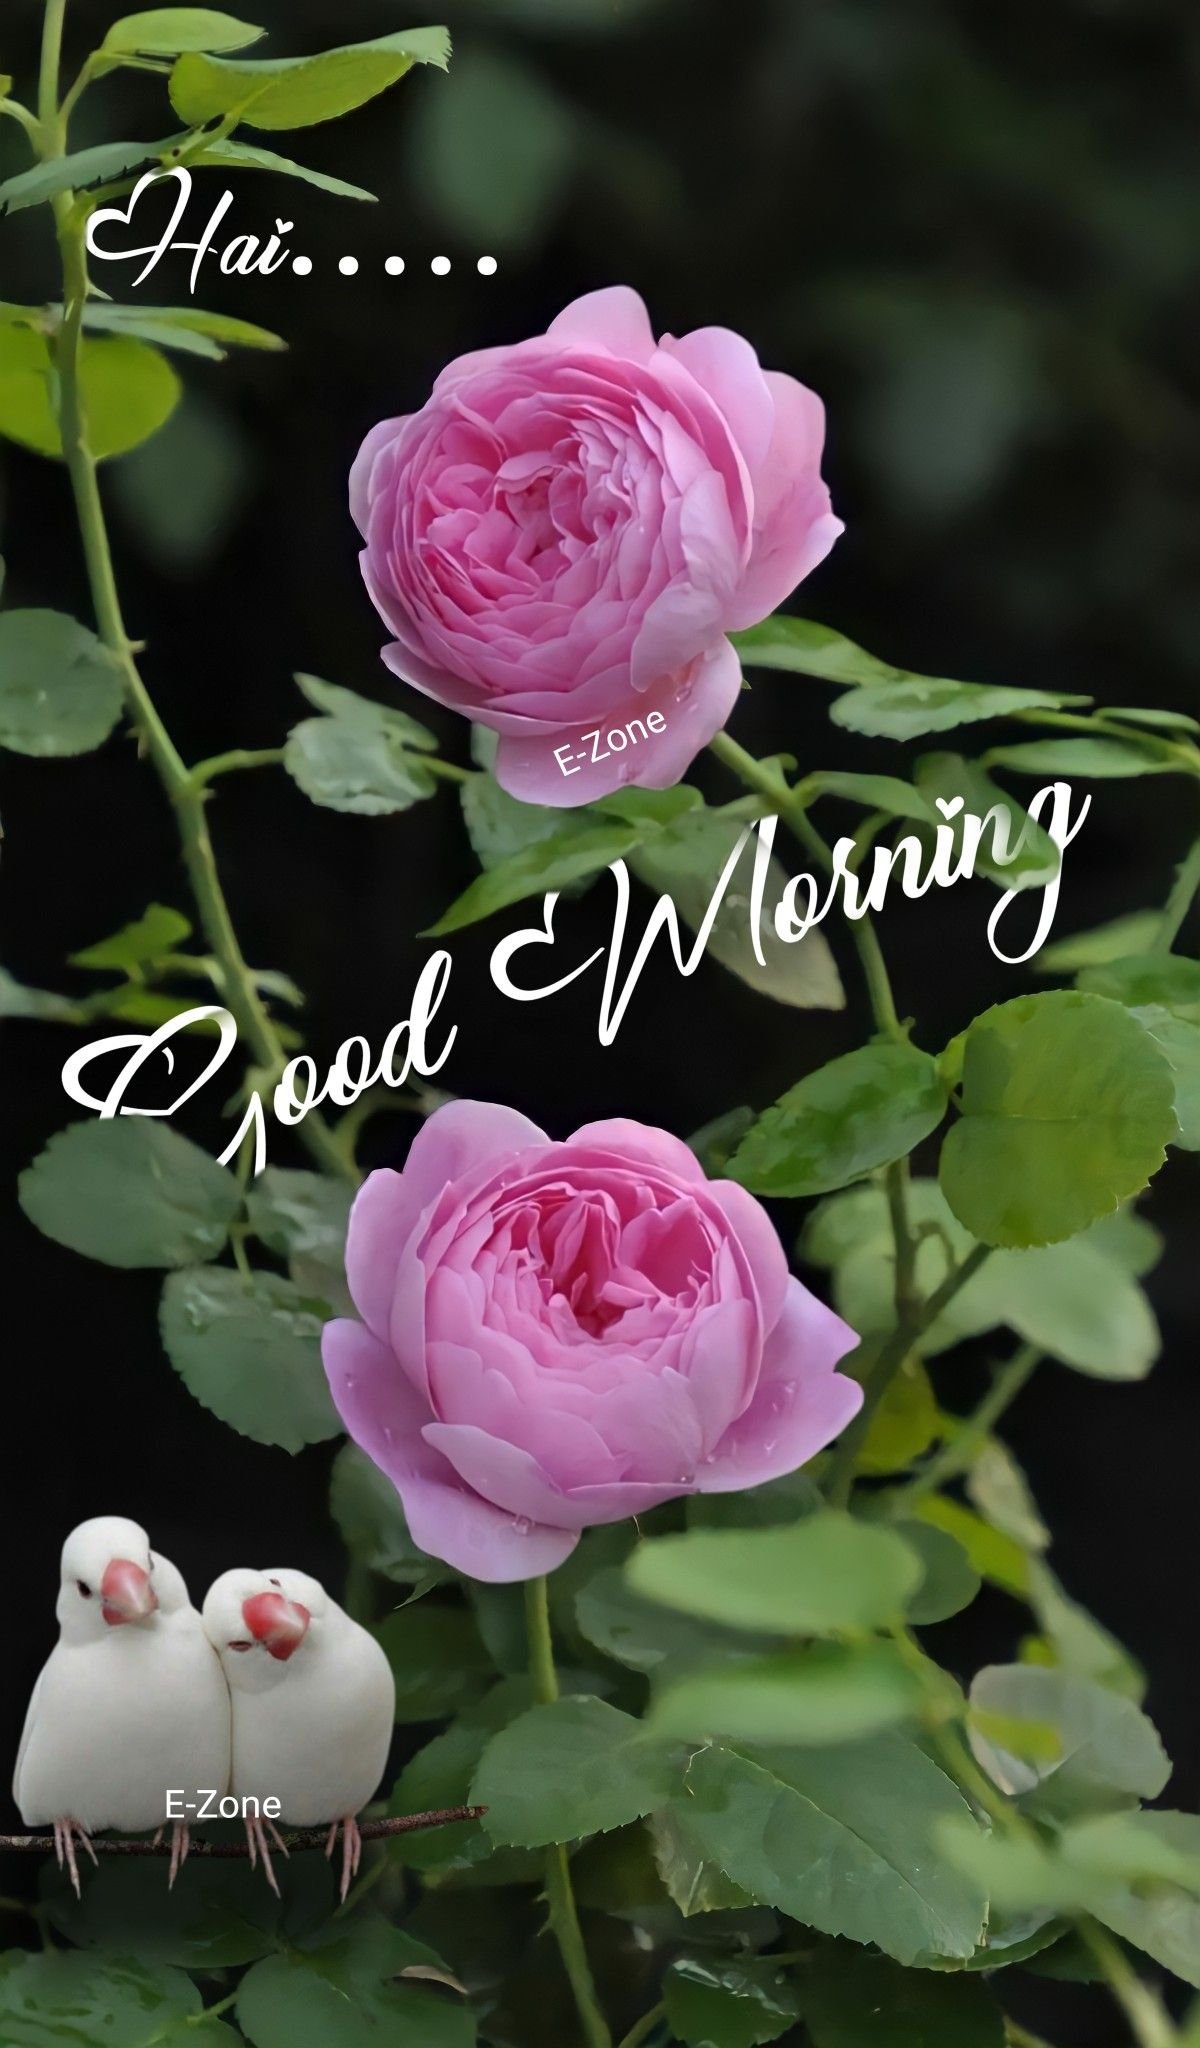 good morning images with pink rose flowers